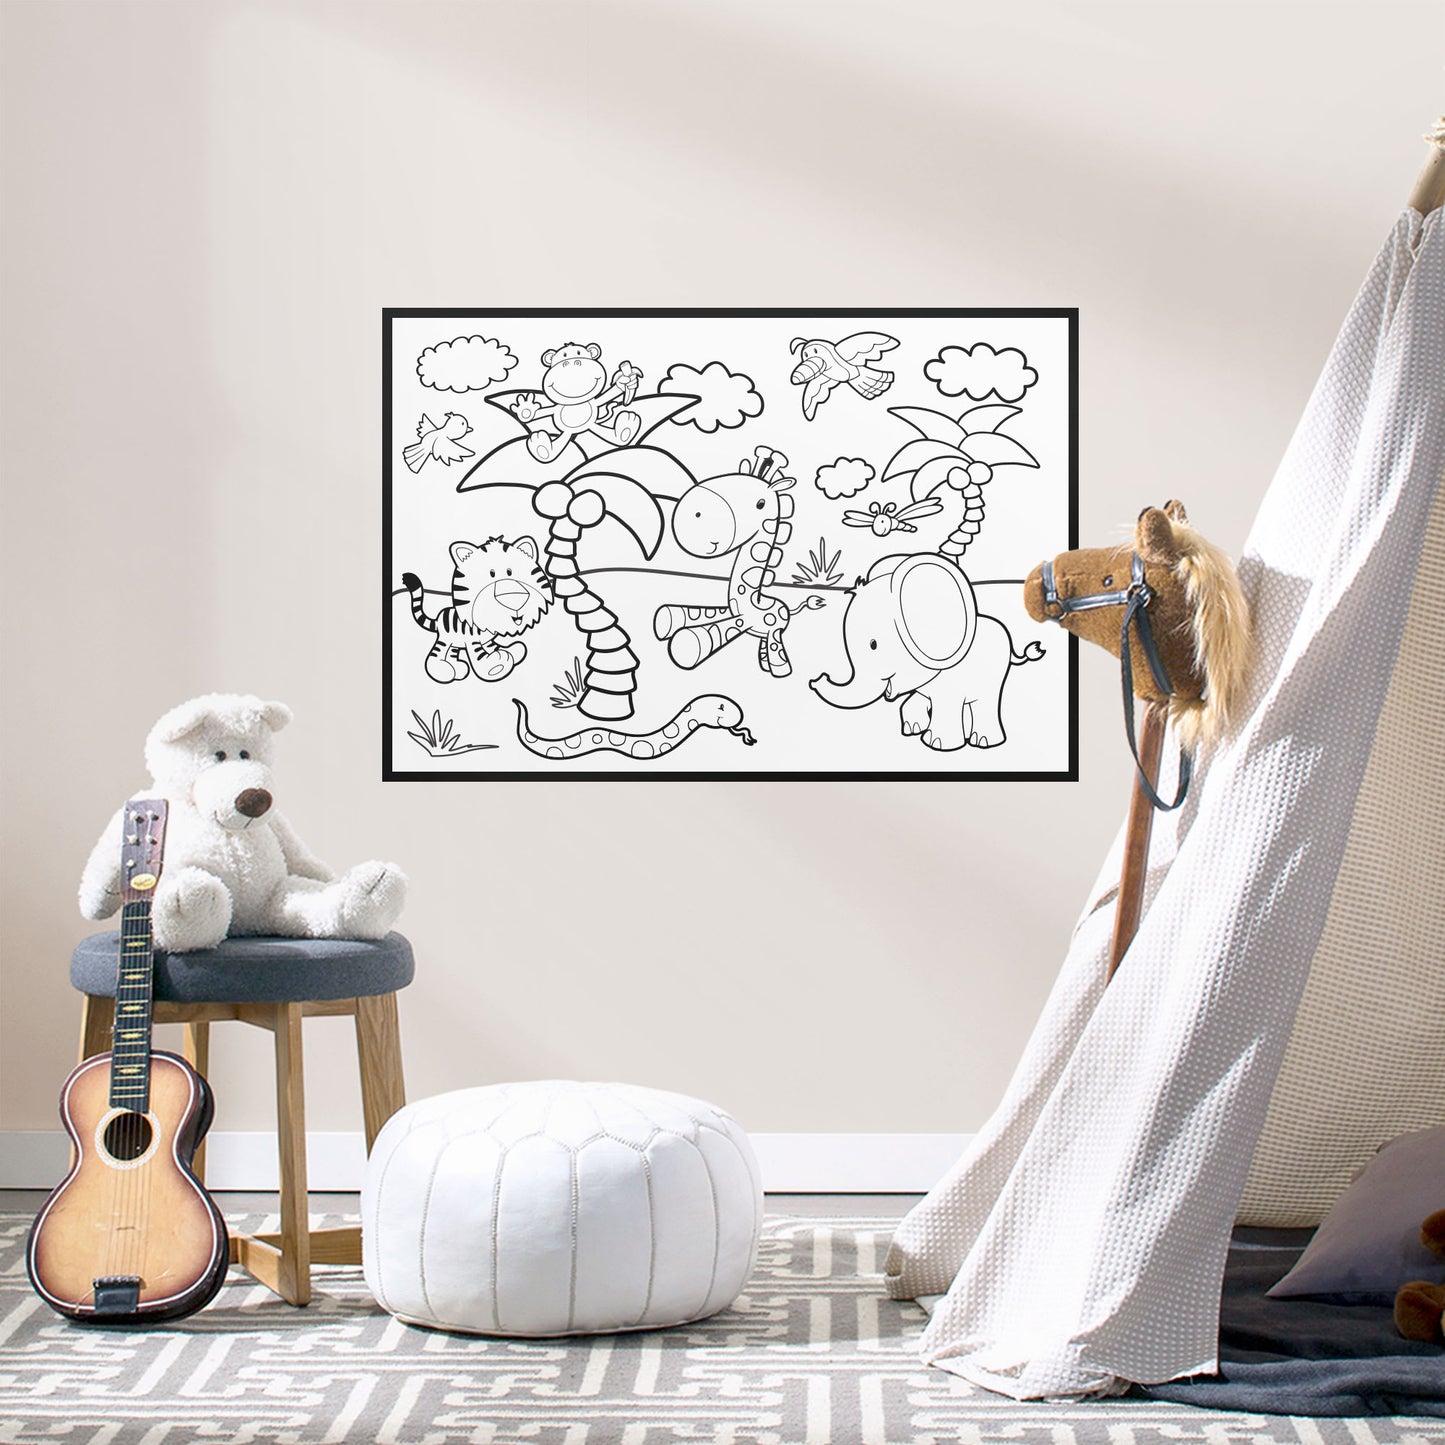 Coloring Sheet: Jungle Animals - Removable Dry Erase Vinyl Decal